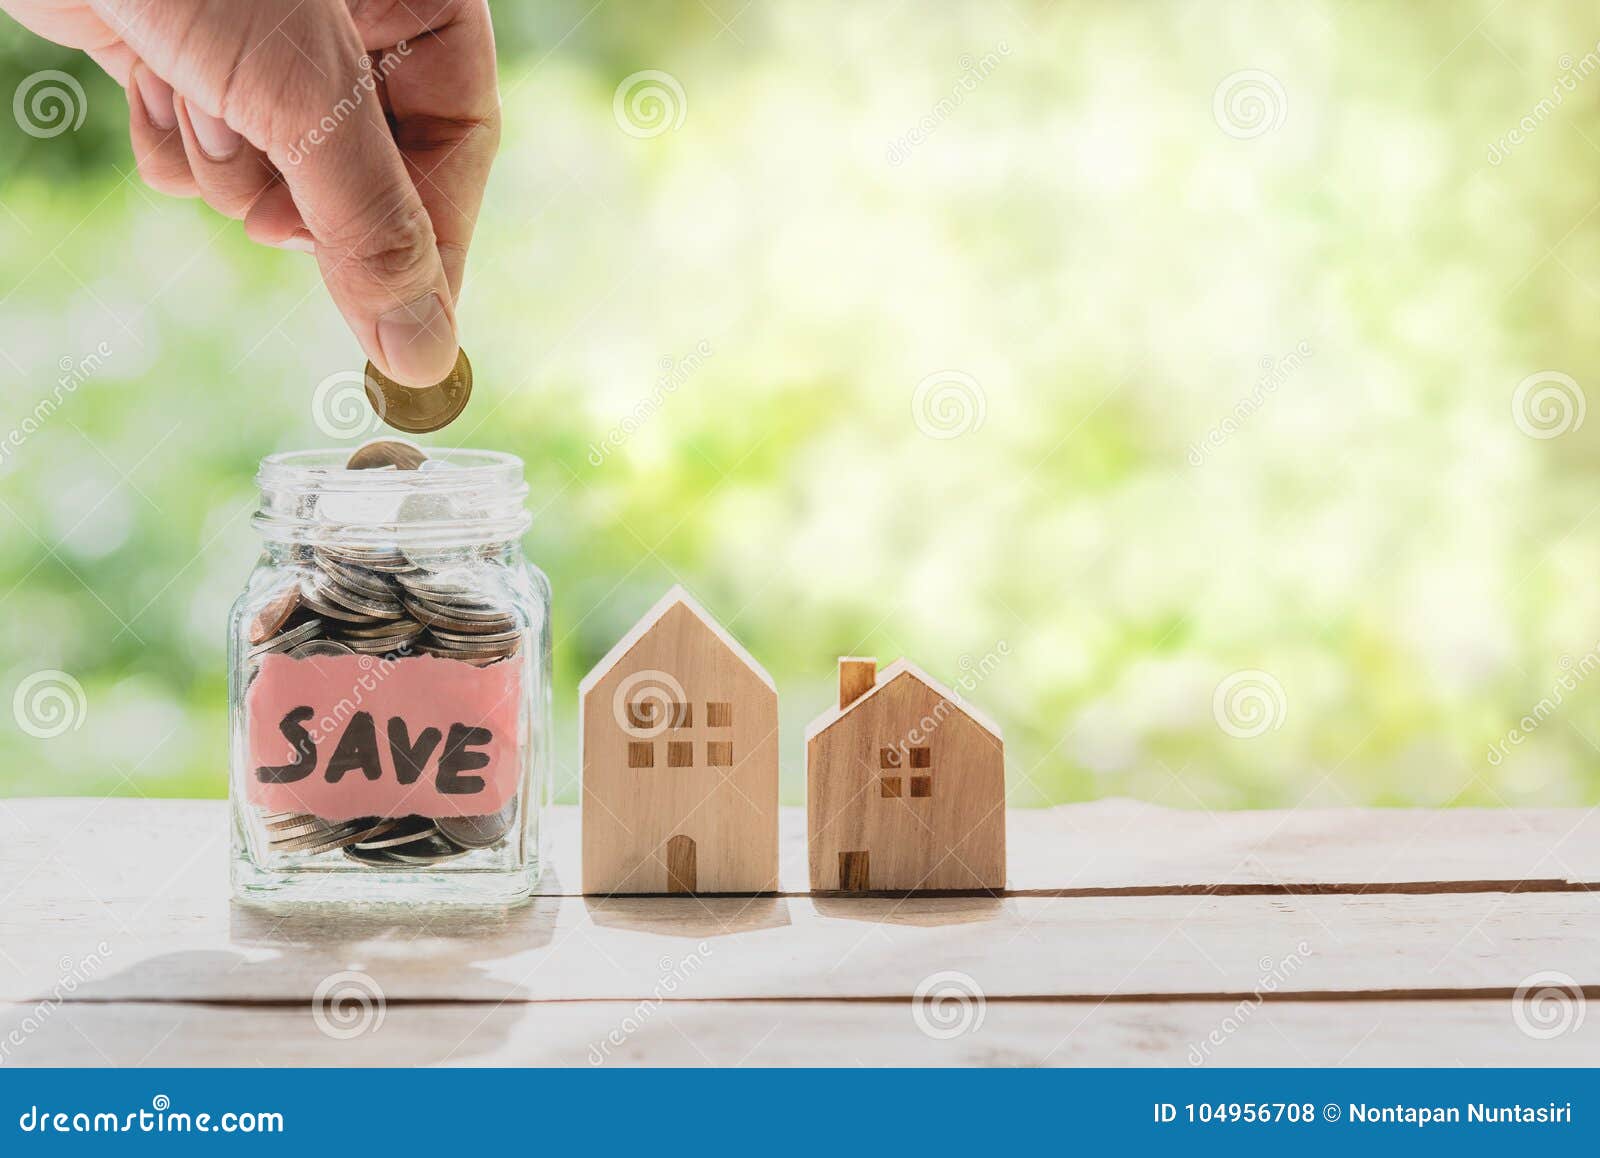 Hand Putting Coin In Glass Jar For Saving Money For Buying House